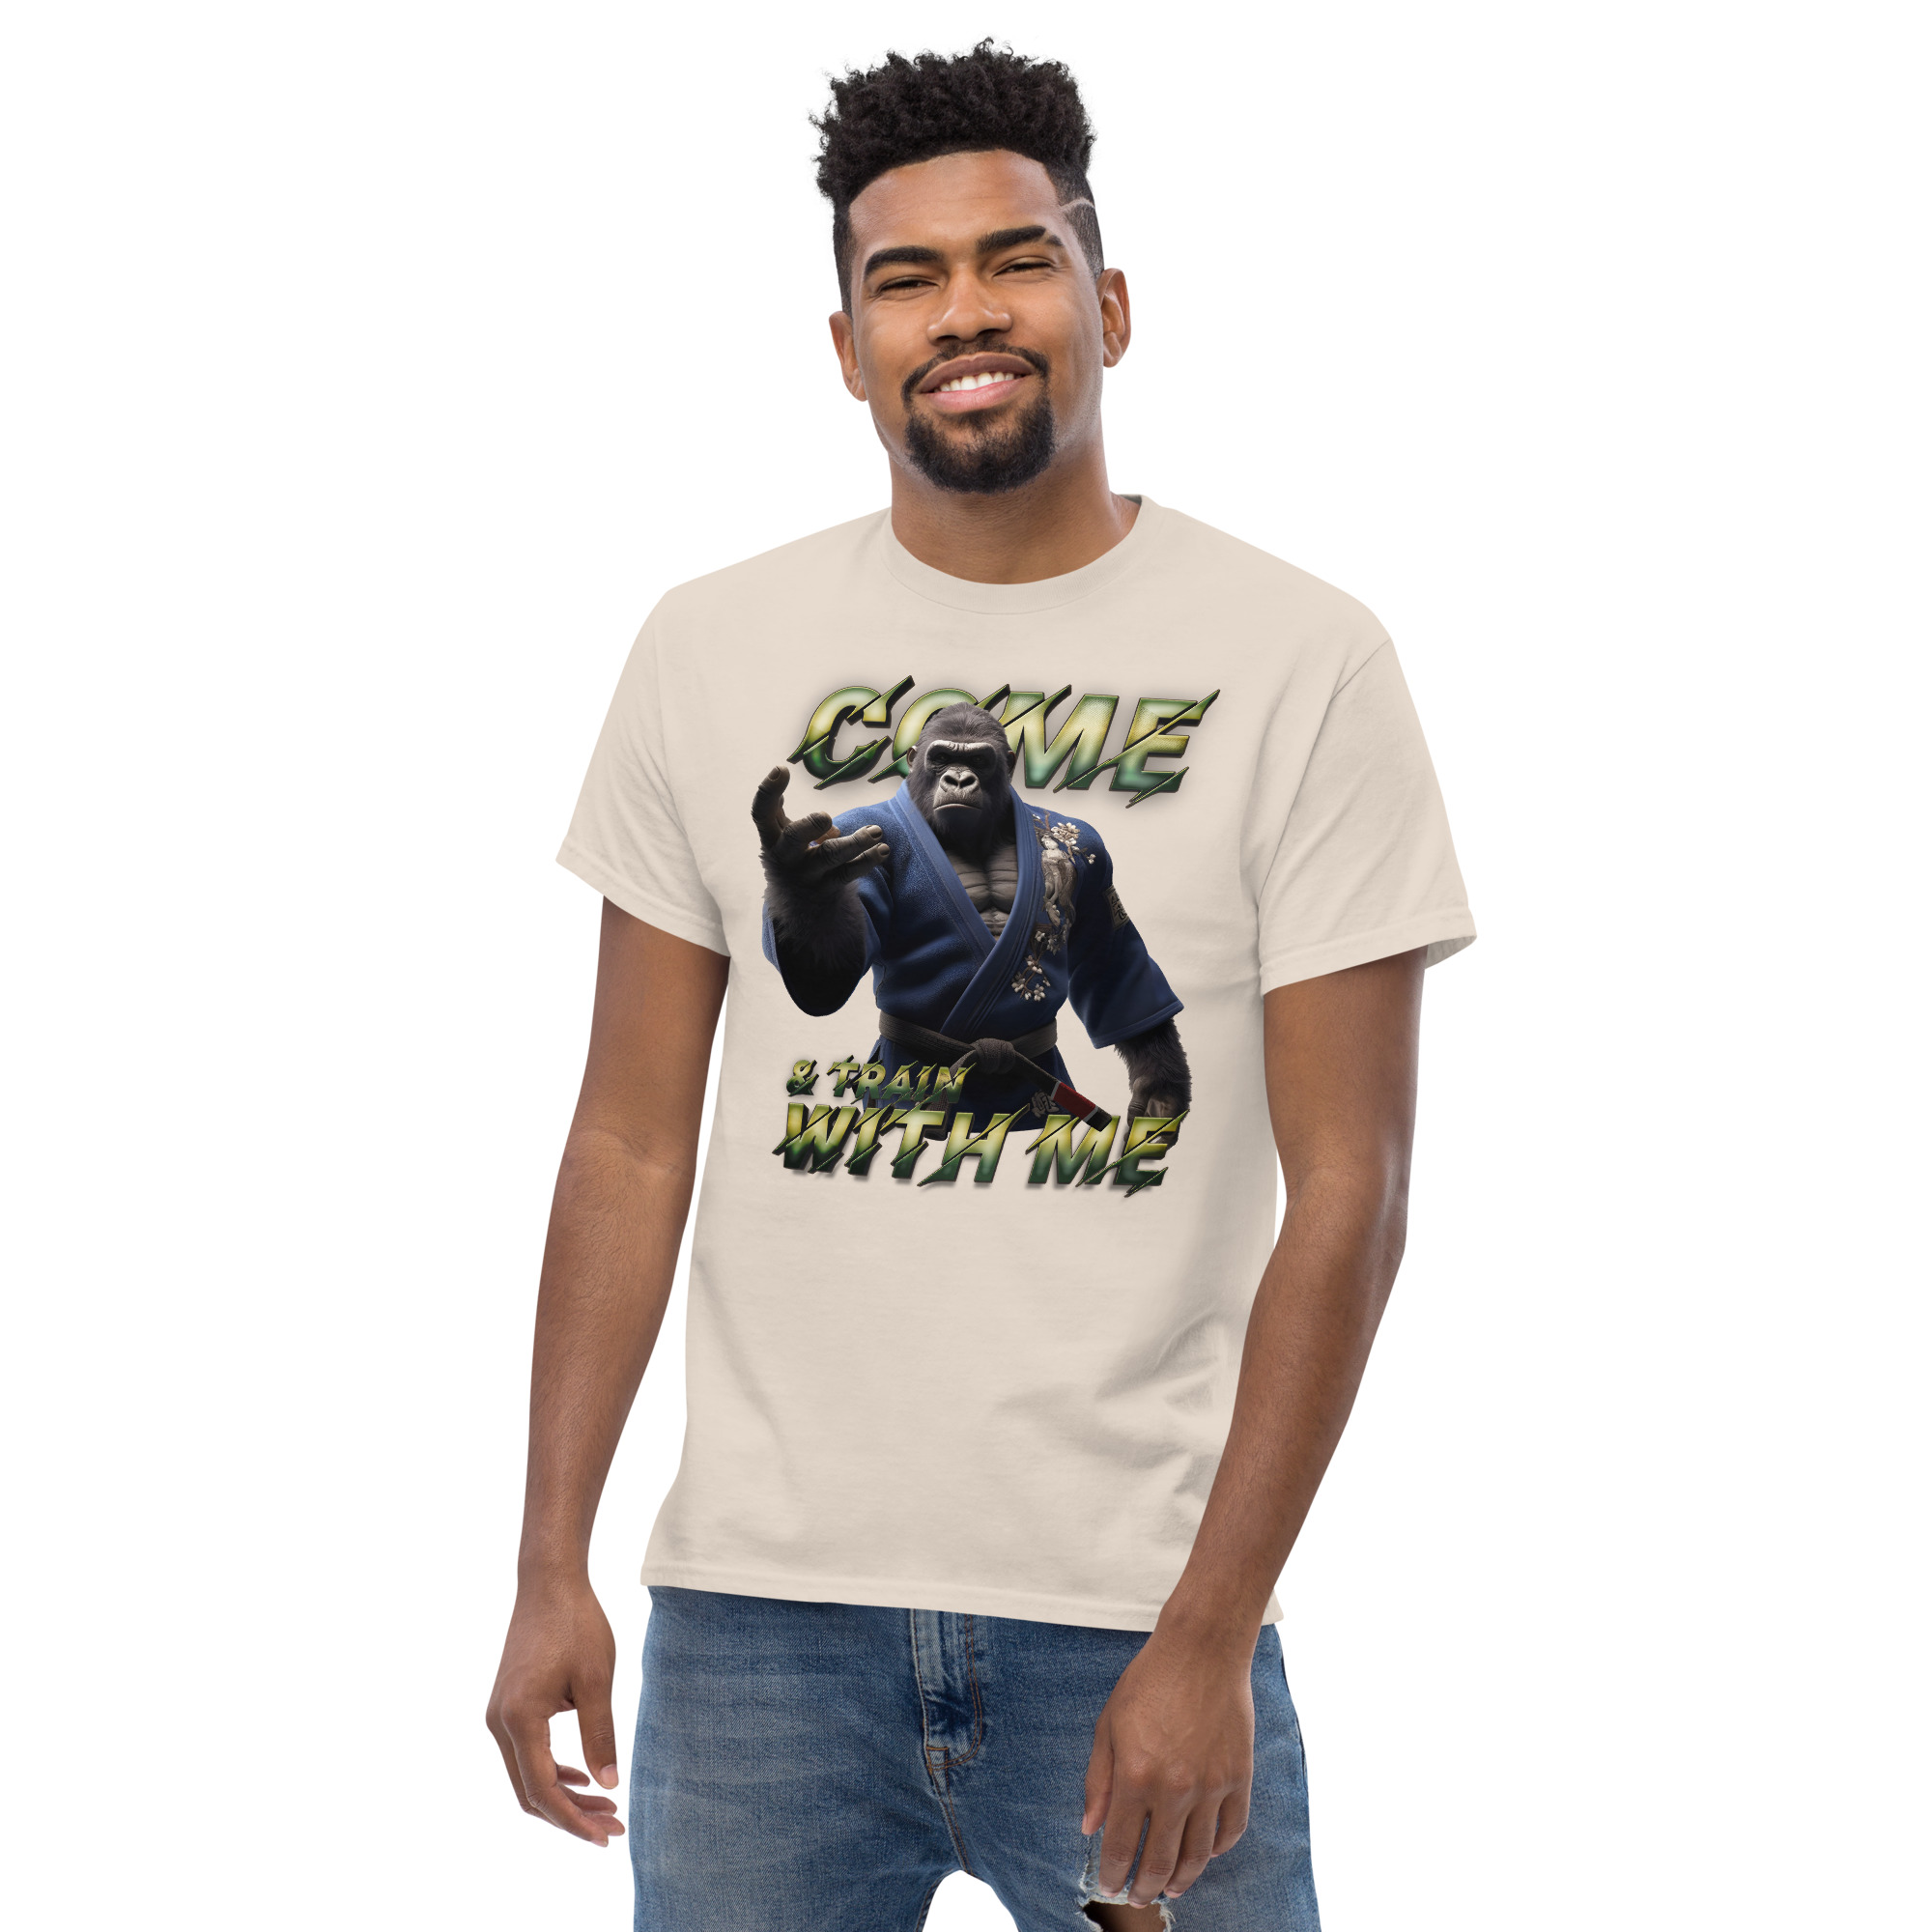 Black Belt Gorilla Challenge Tee: Inviting You to Roll 20